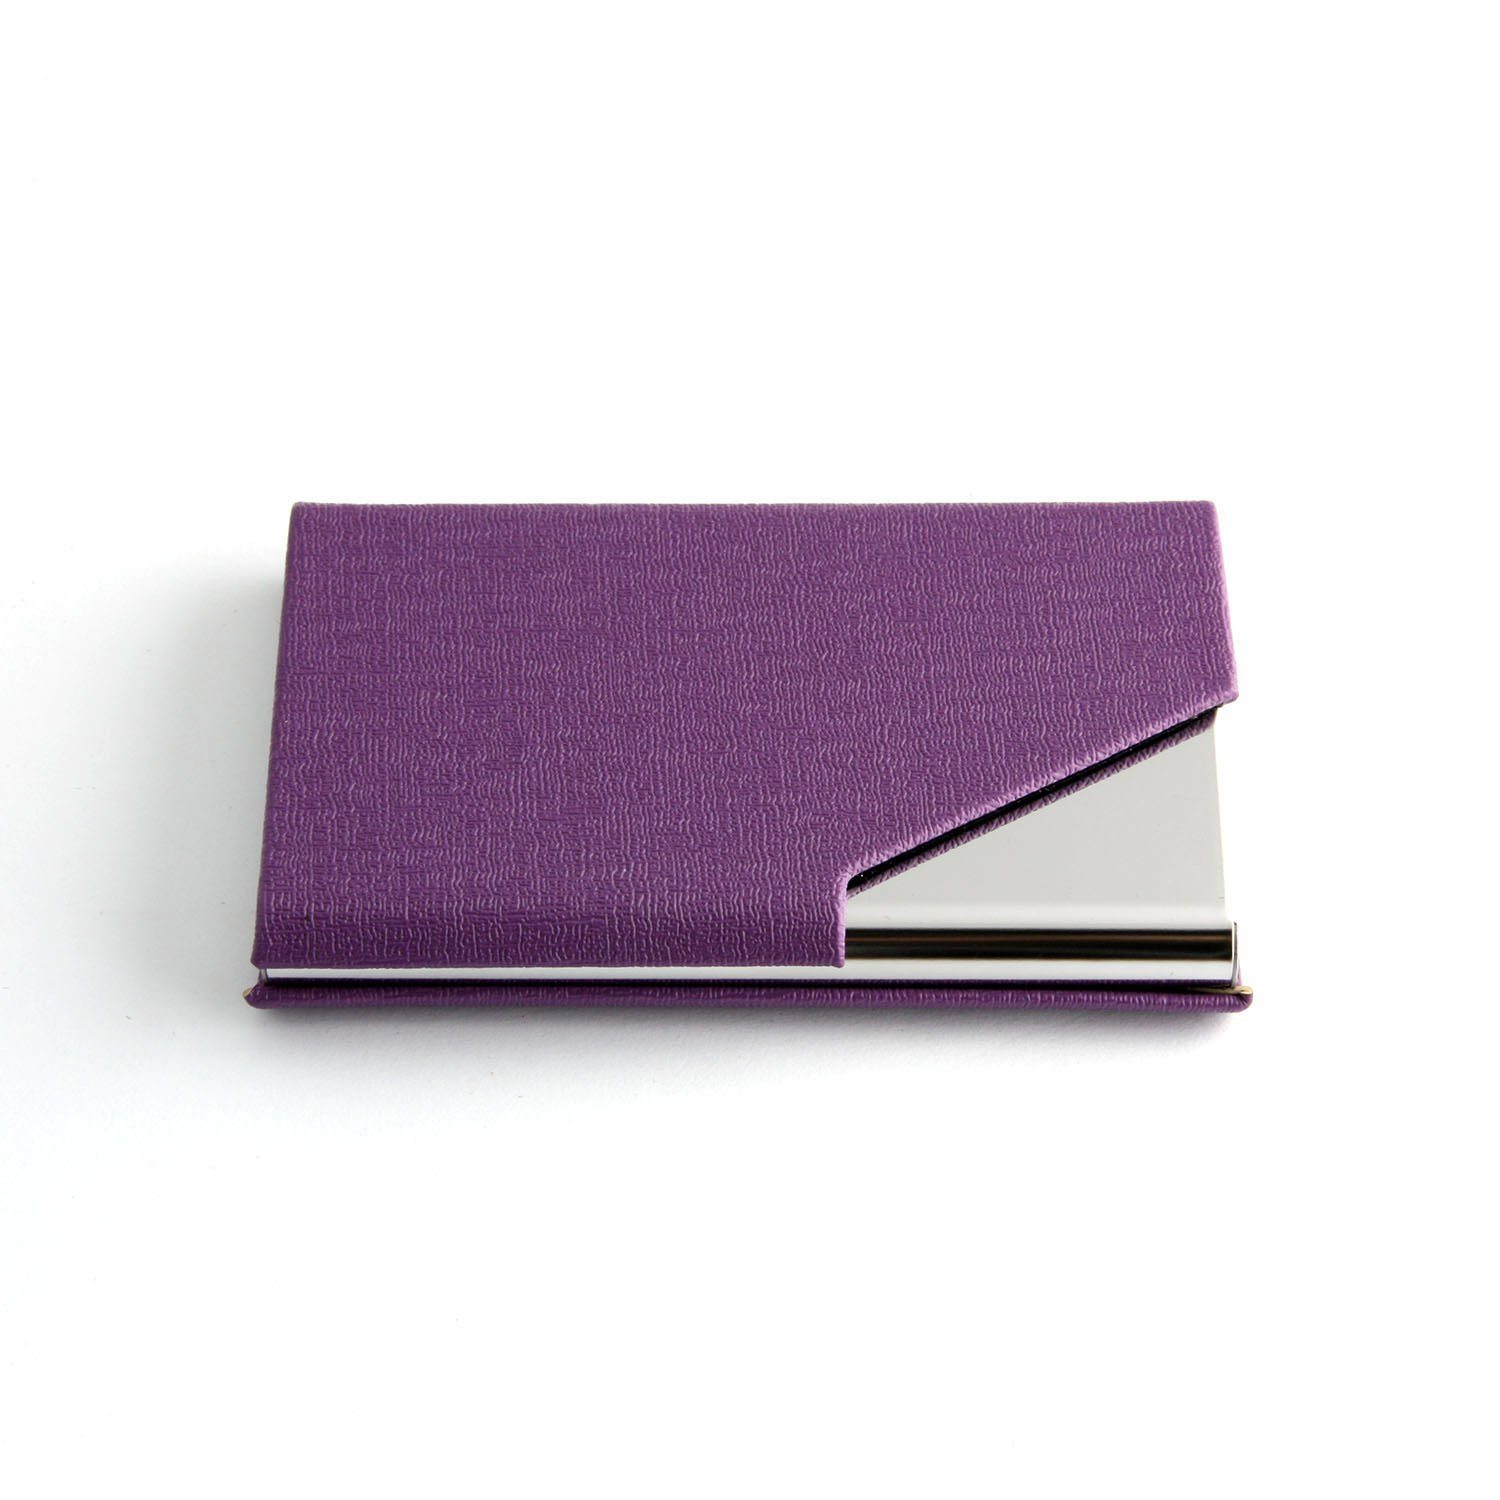 7 Business Card Holders for You To Look Professional at External Meetings